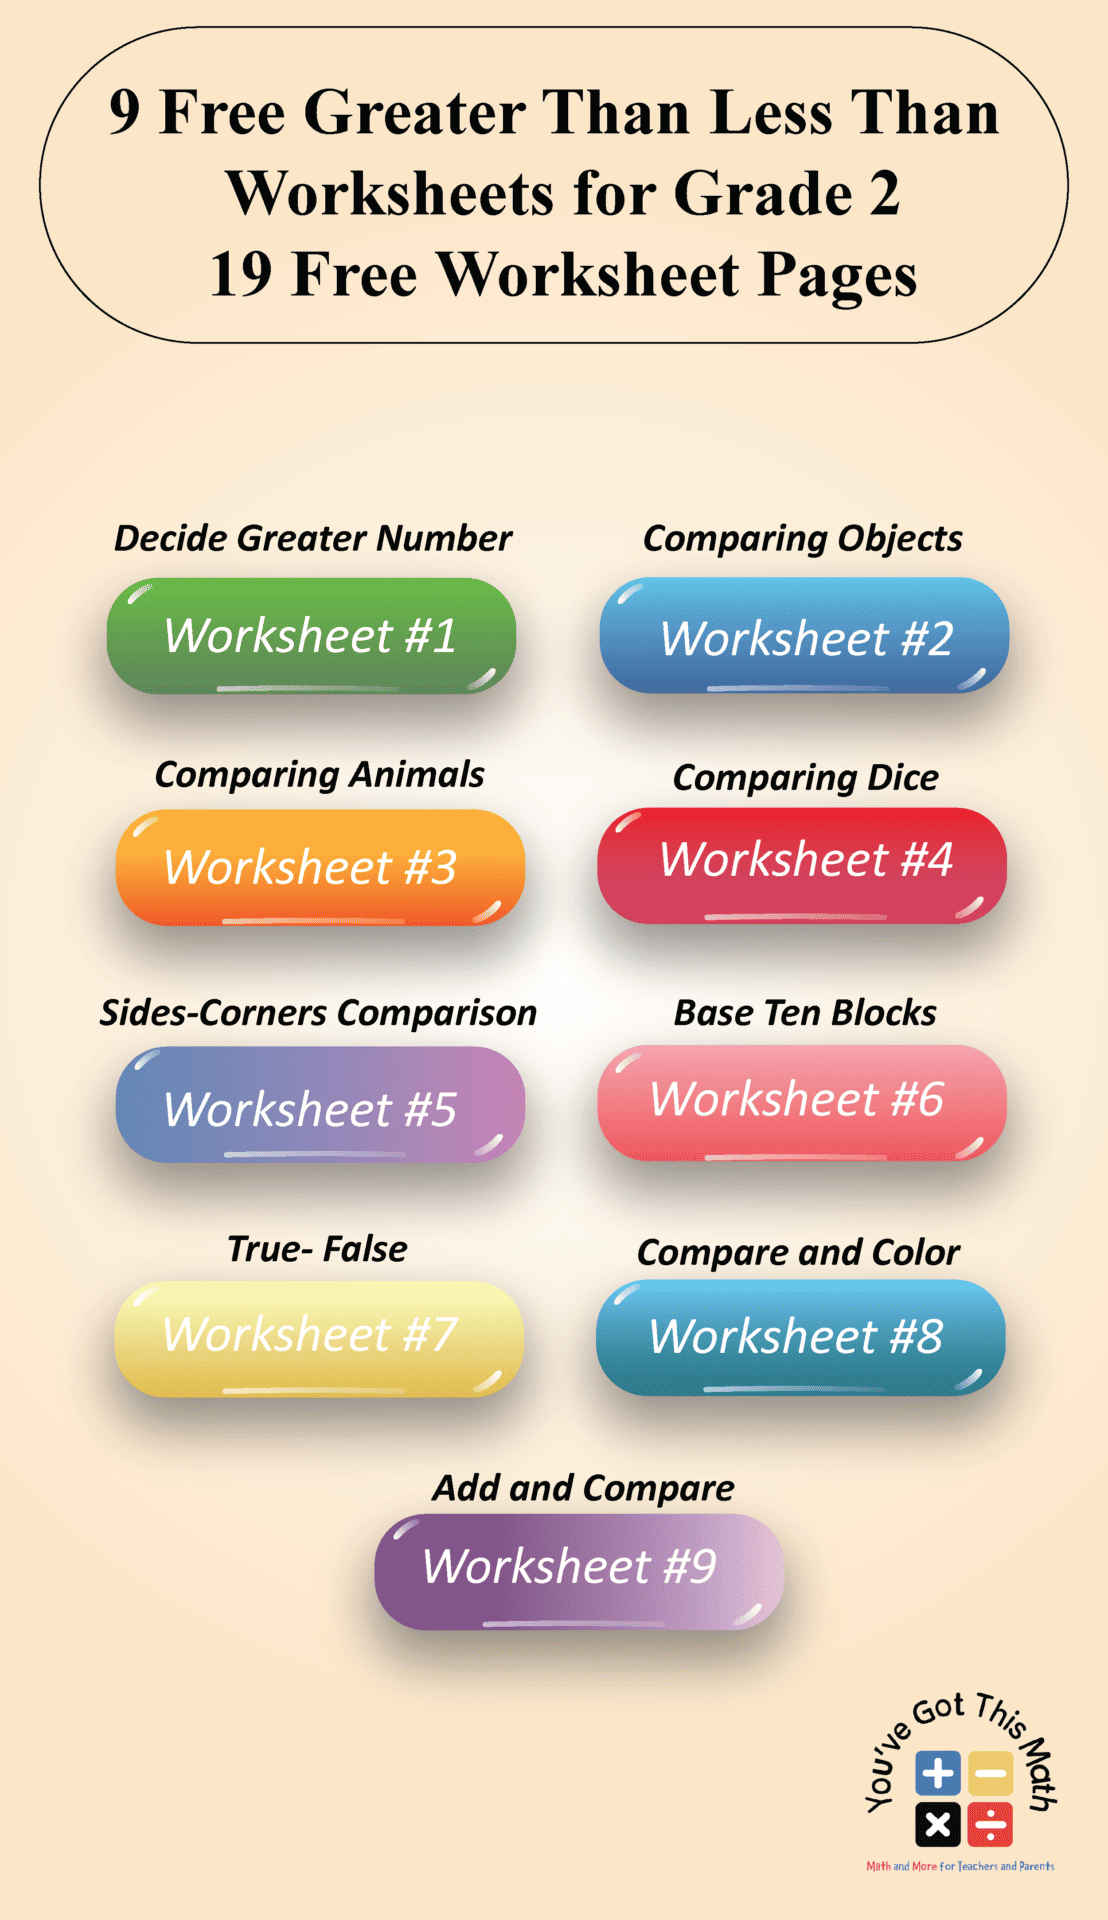 Greater Than Less Than Worksheets for Grade 2 Box Image_01